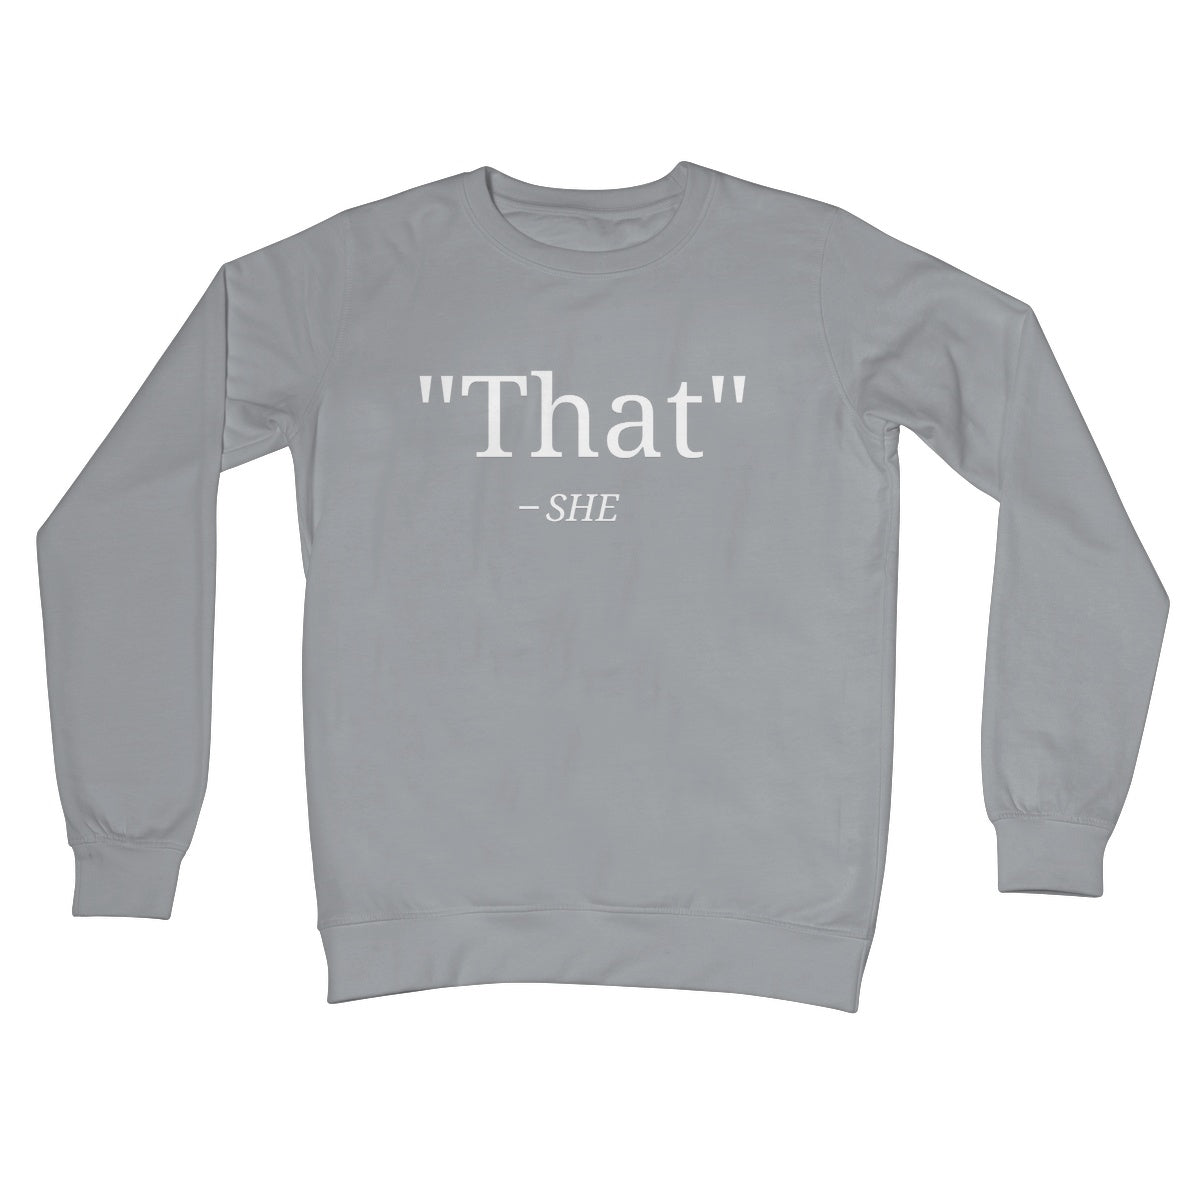 that's what she said jumper grey